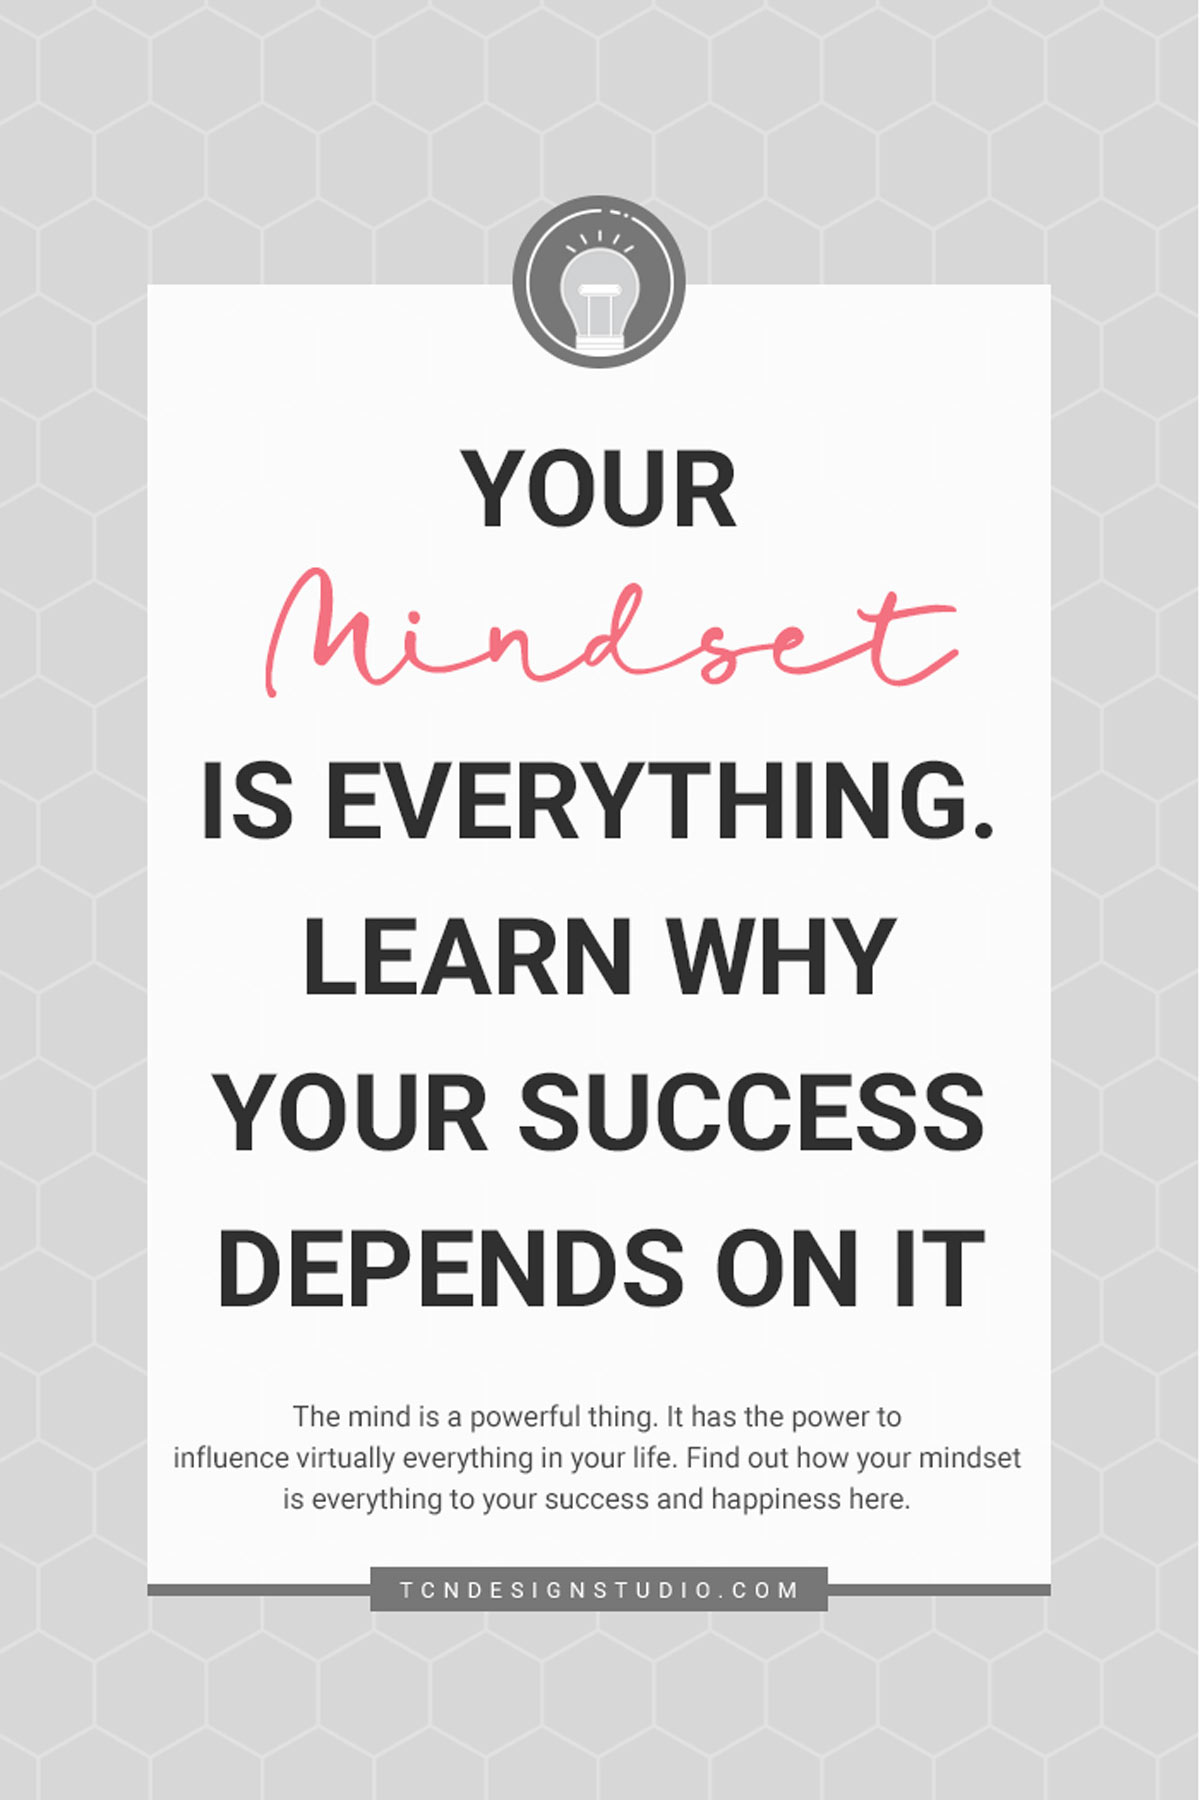 Your Mindset is Everything. Learn Why Your Success Depends on it